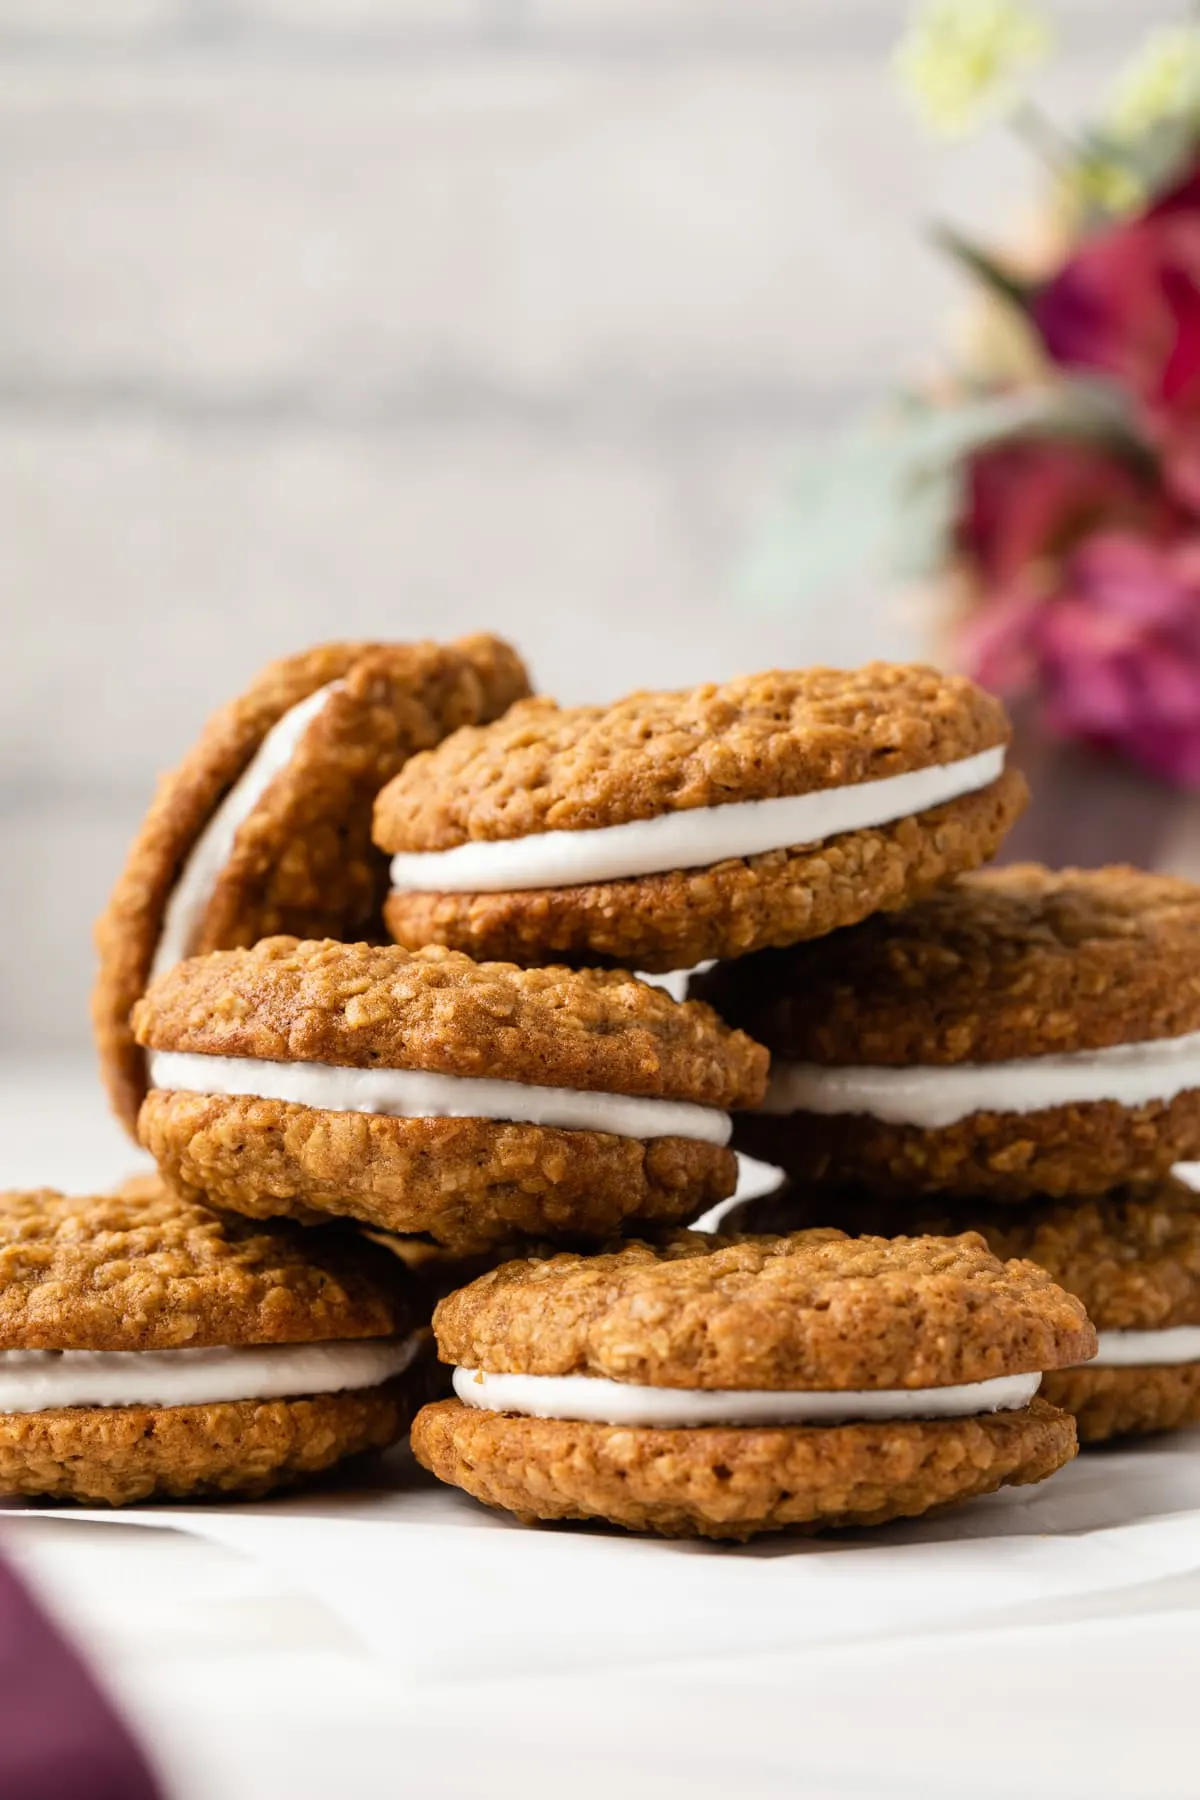 Oatmeal cream pies stacked on a tabletop.